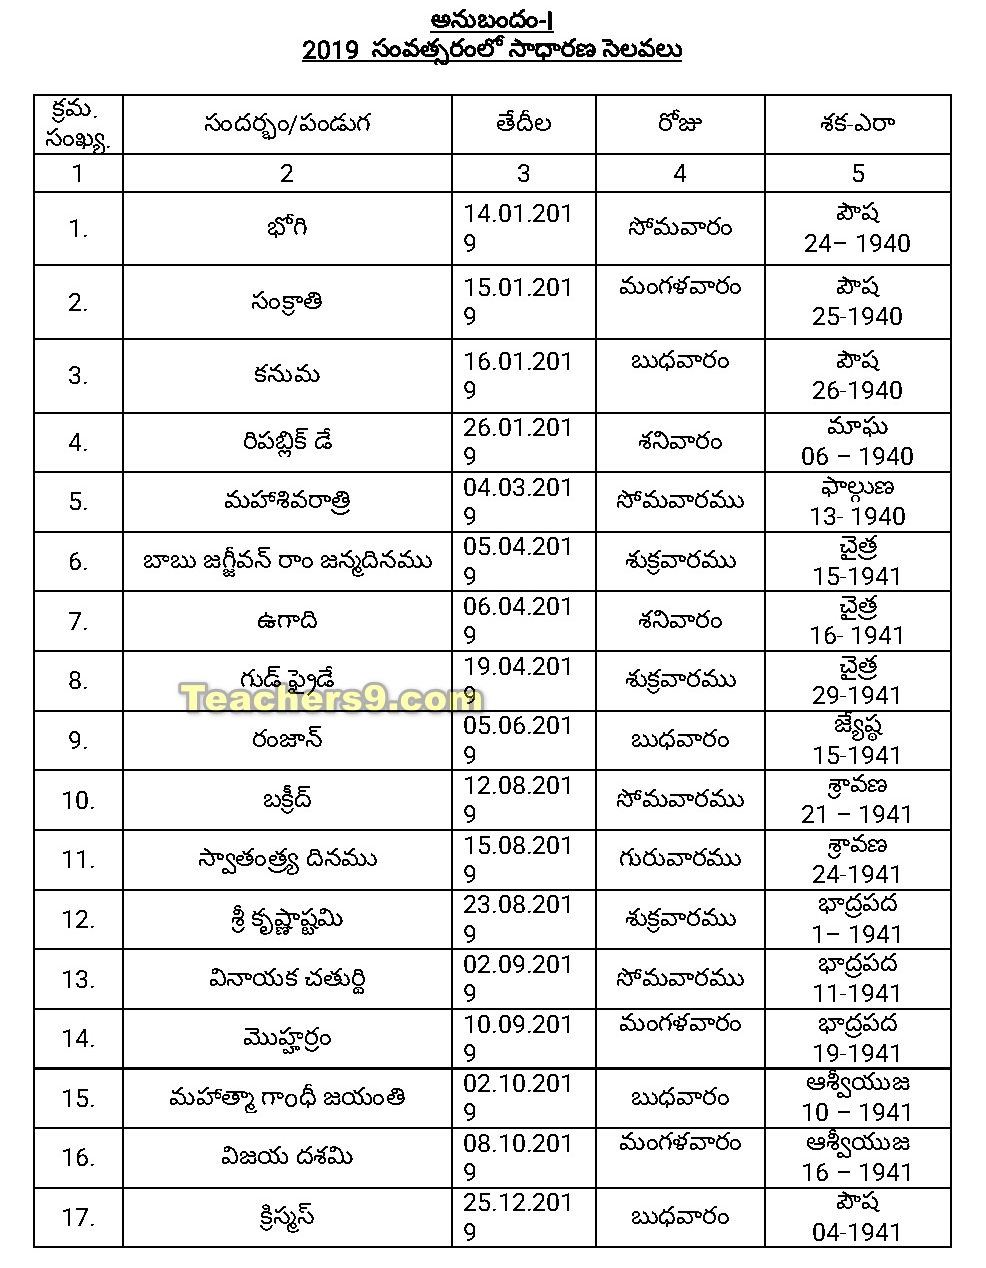 General Holidays for the year 2019 in Andhra Pradesh